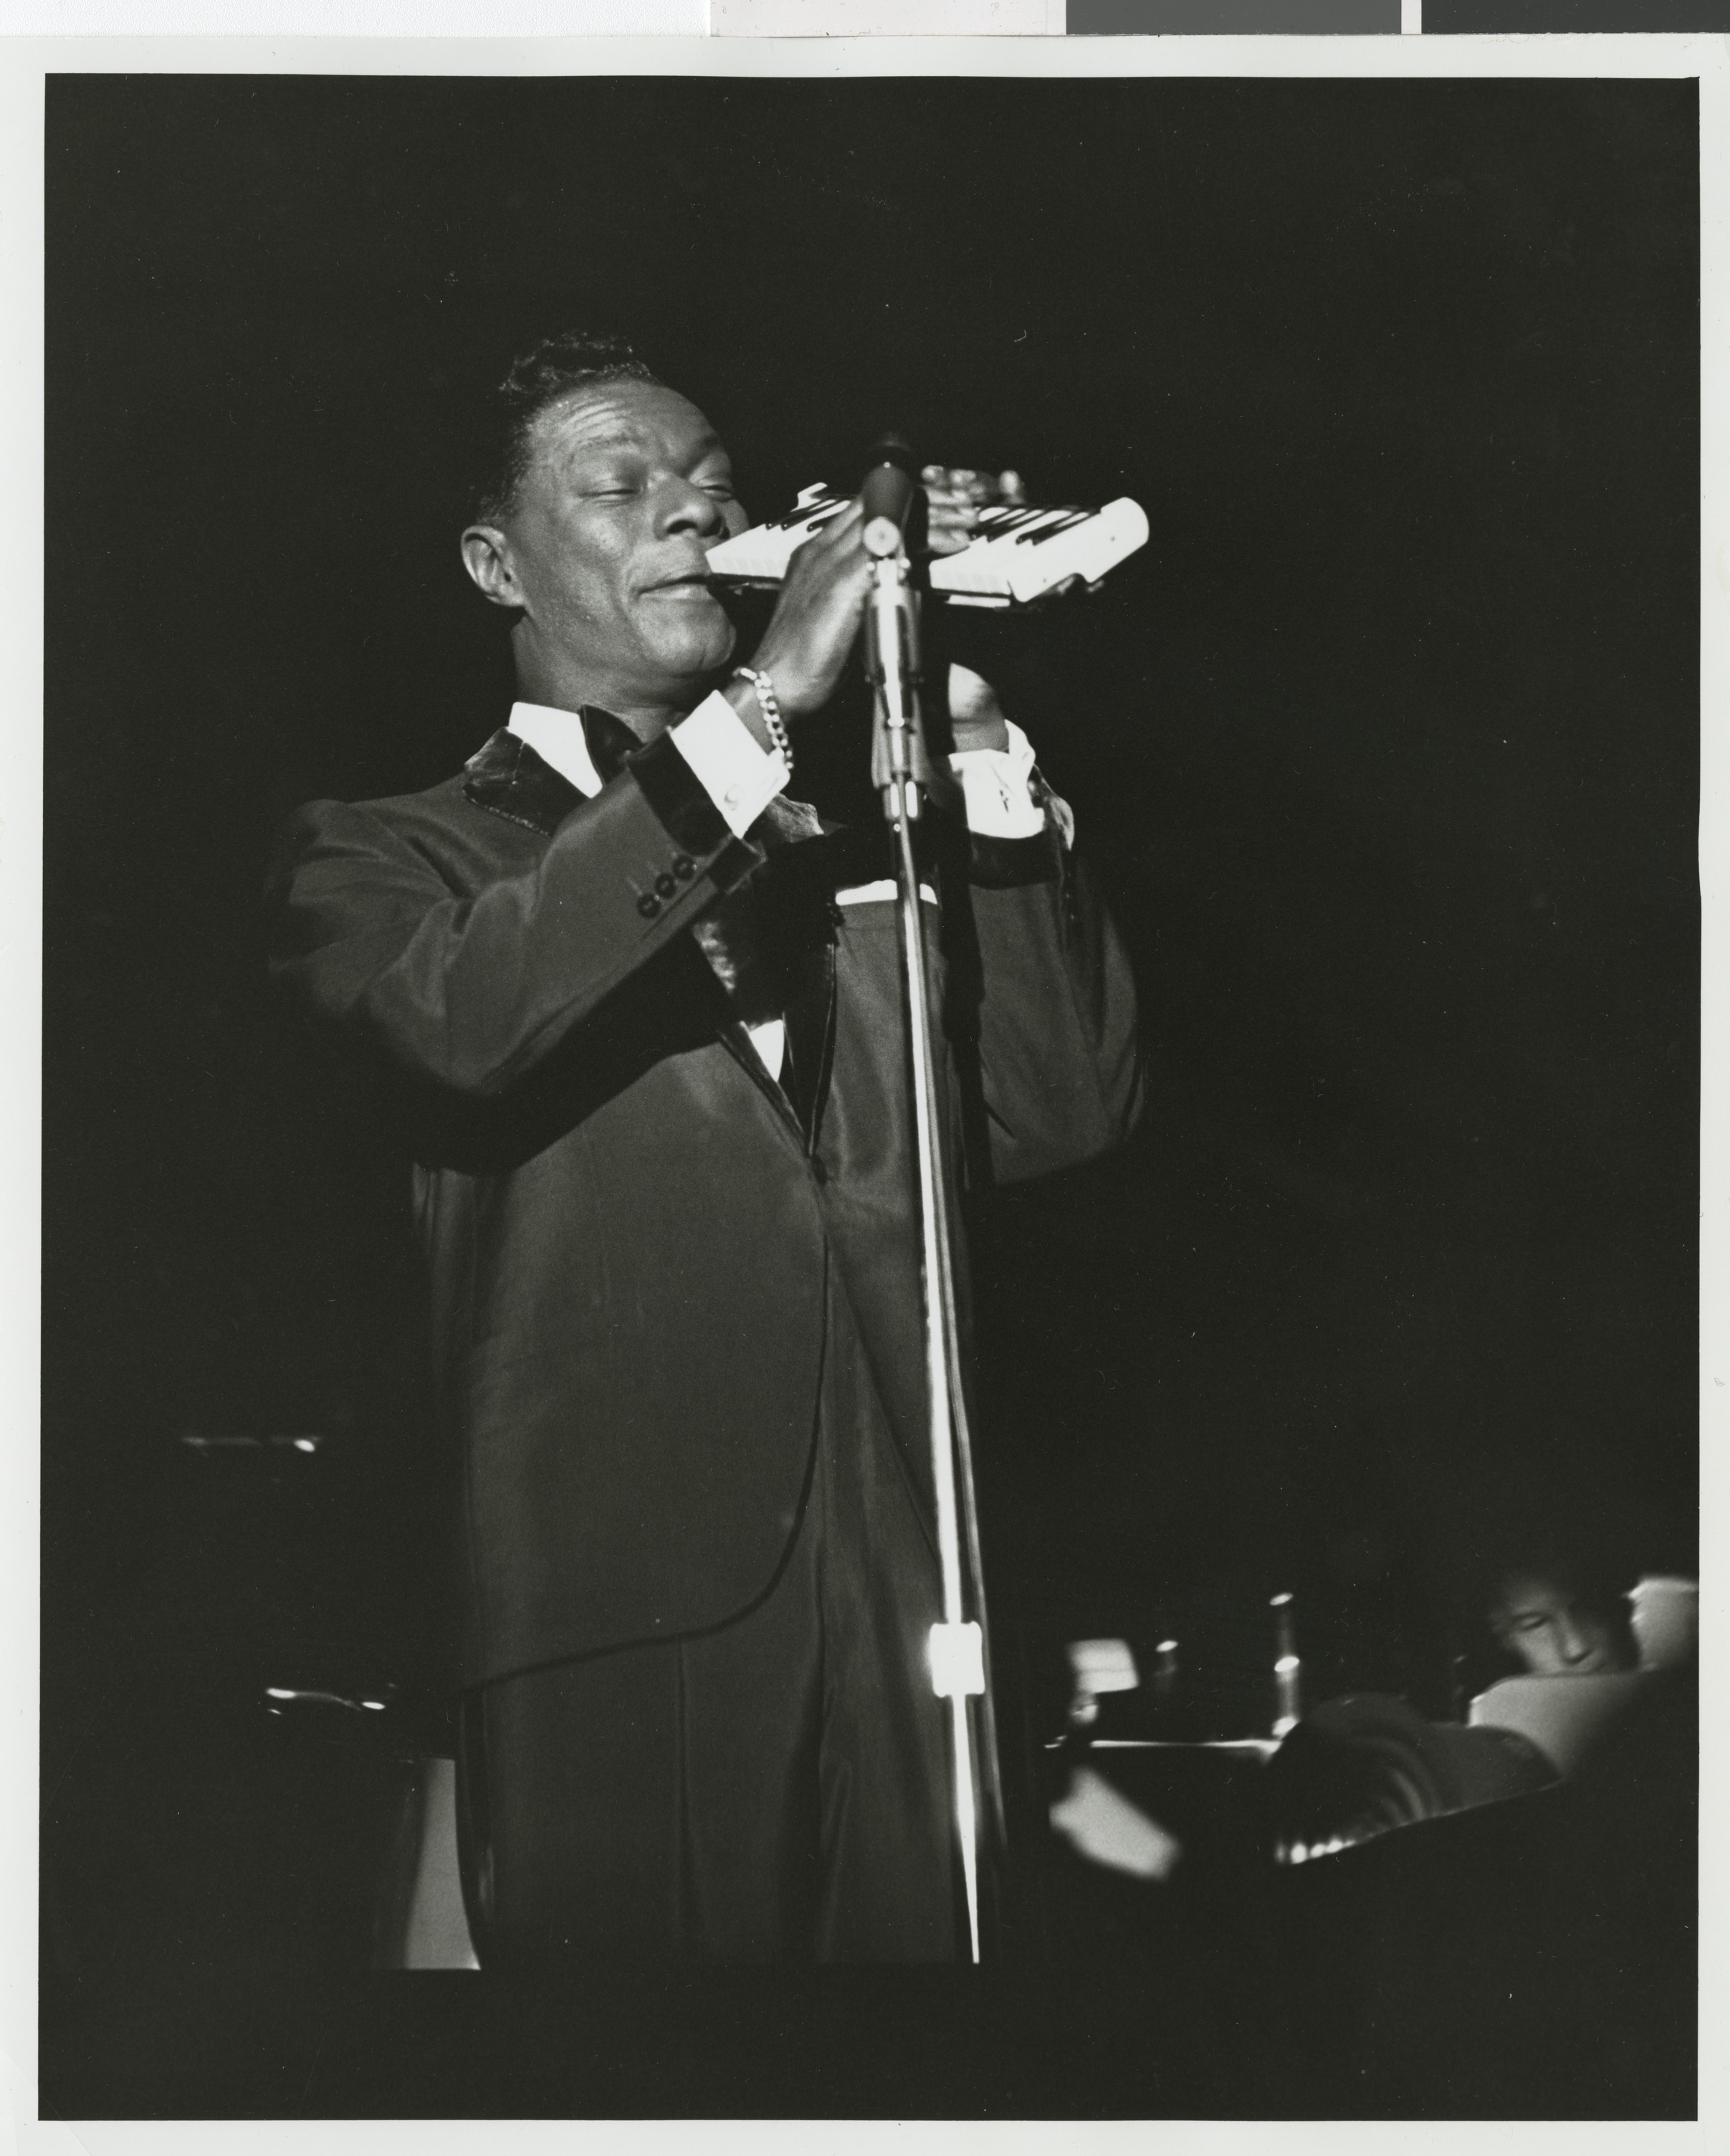 Cole onstage, image 004